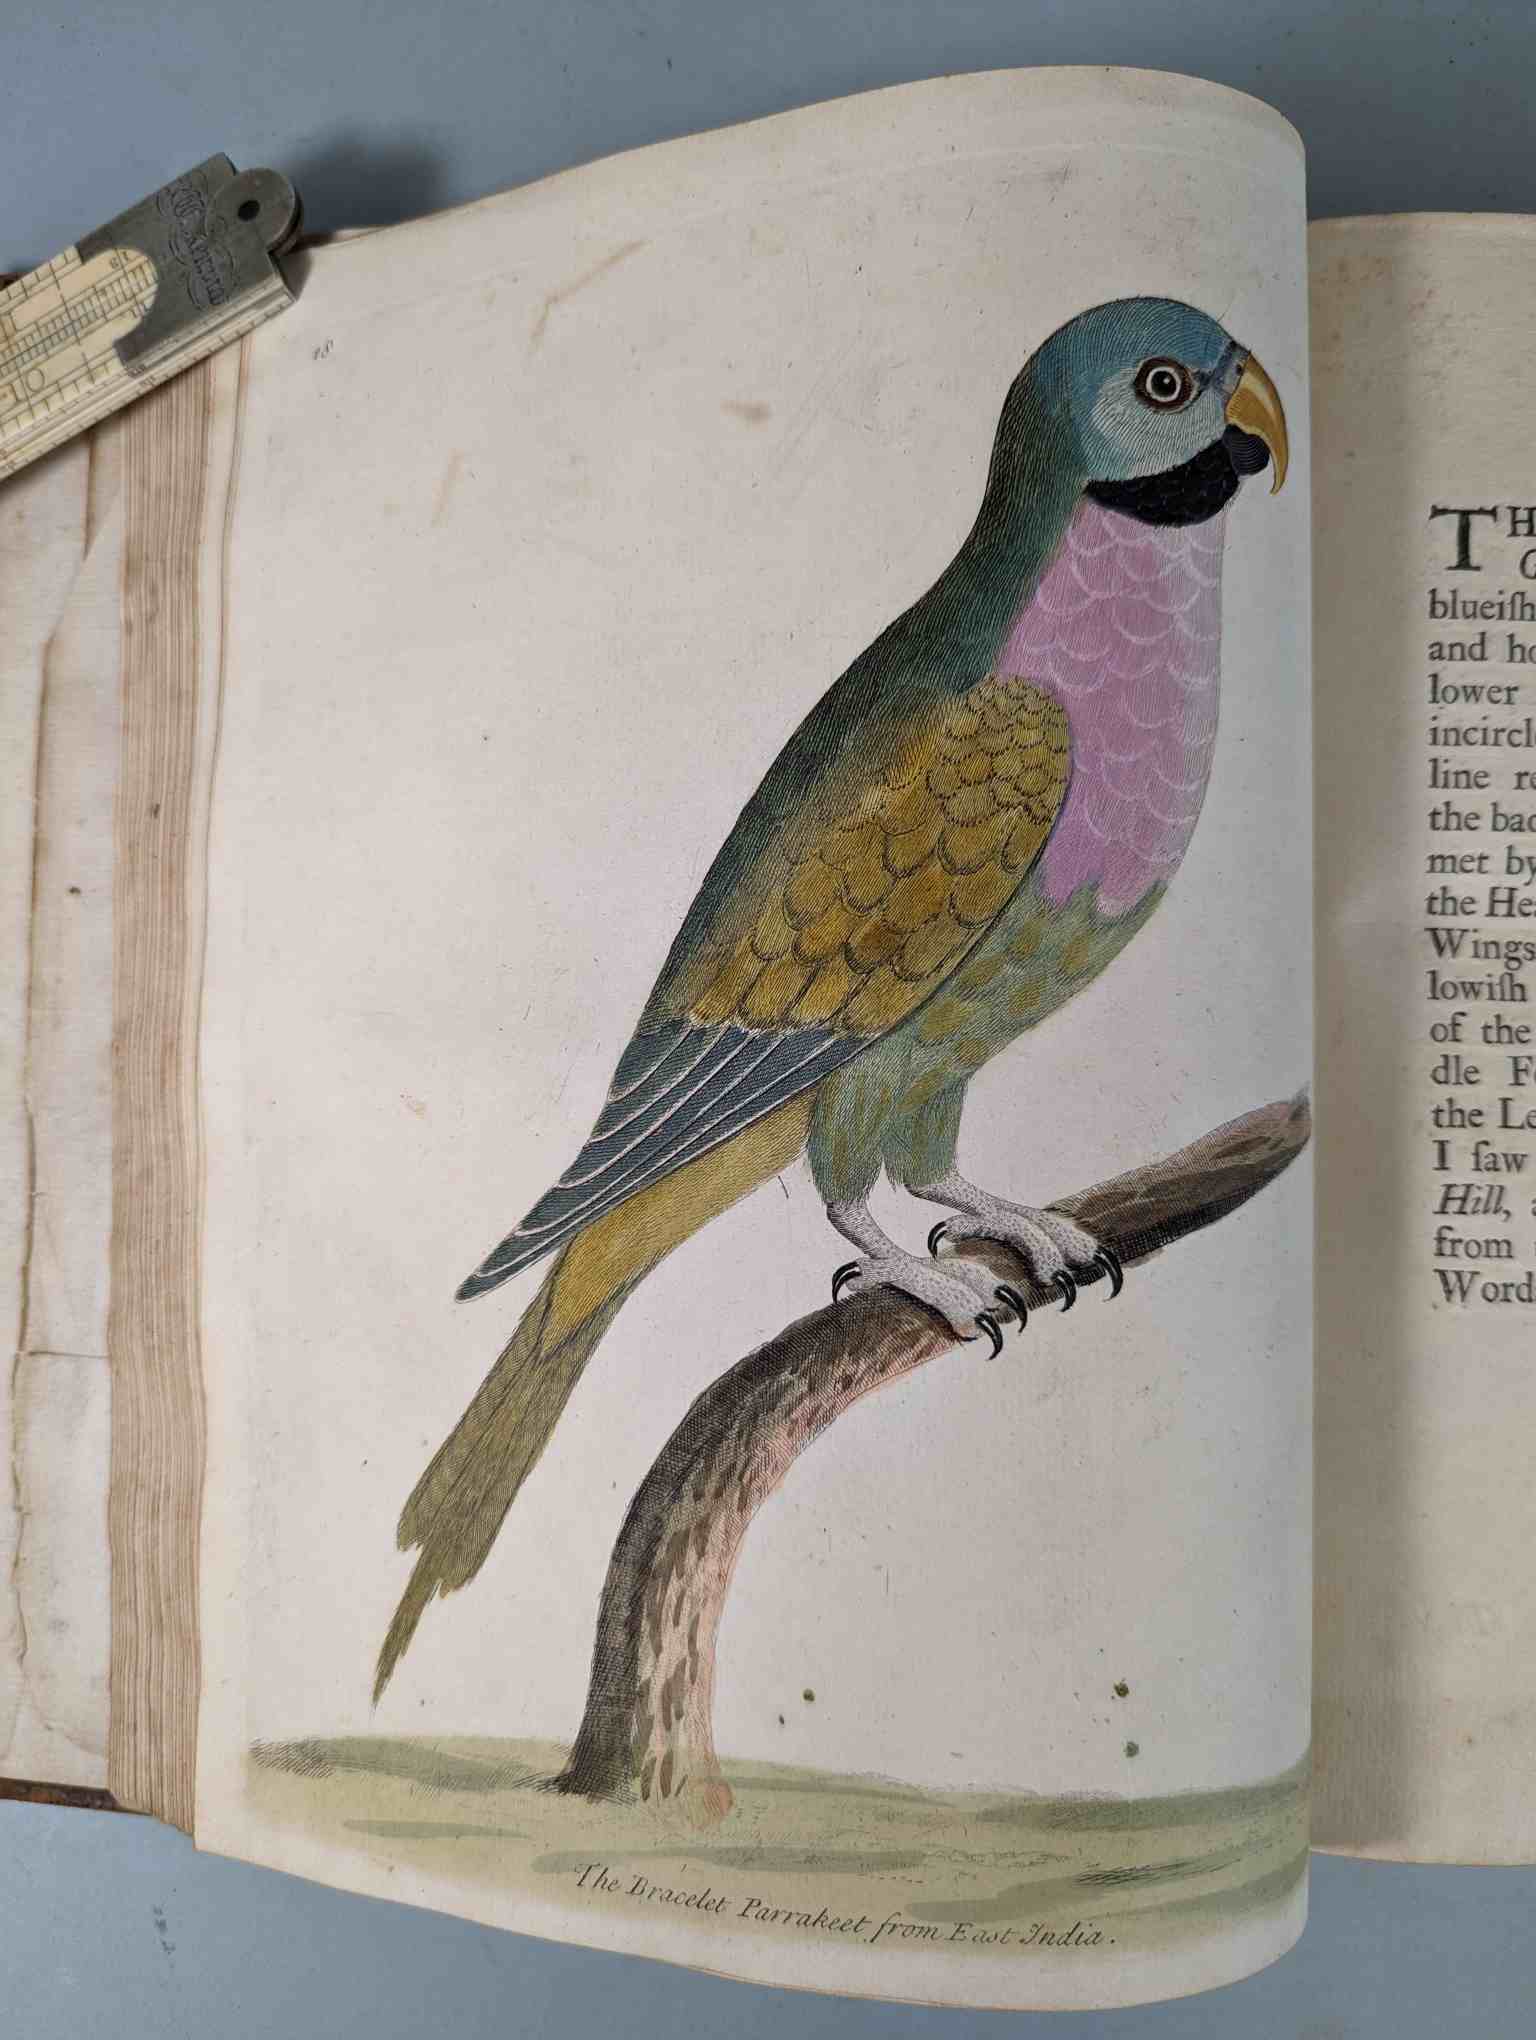 ALBIN, Eleazar. A Natural History of Birds, to which are added, Notes and Observations by W. - Image 122 of 208